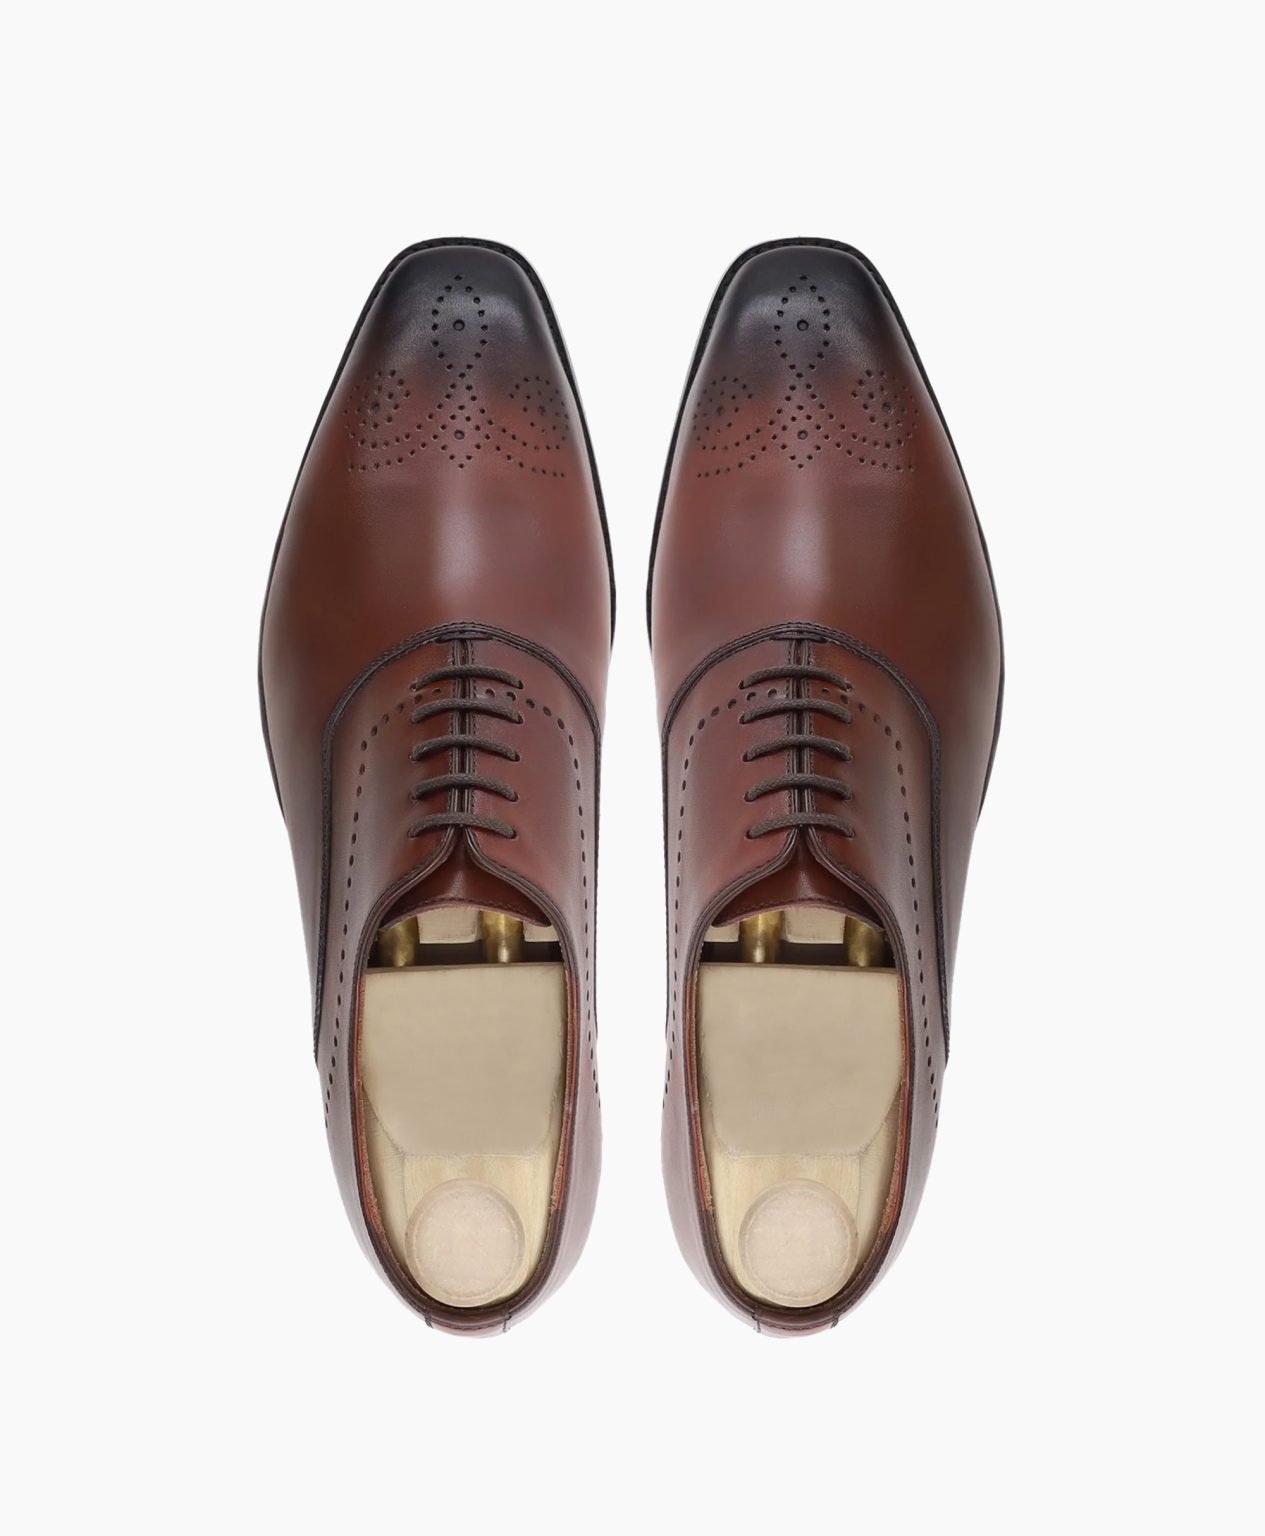 crewe-oxford-burnish-oxblood-leather-shoes-image202